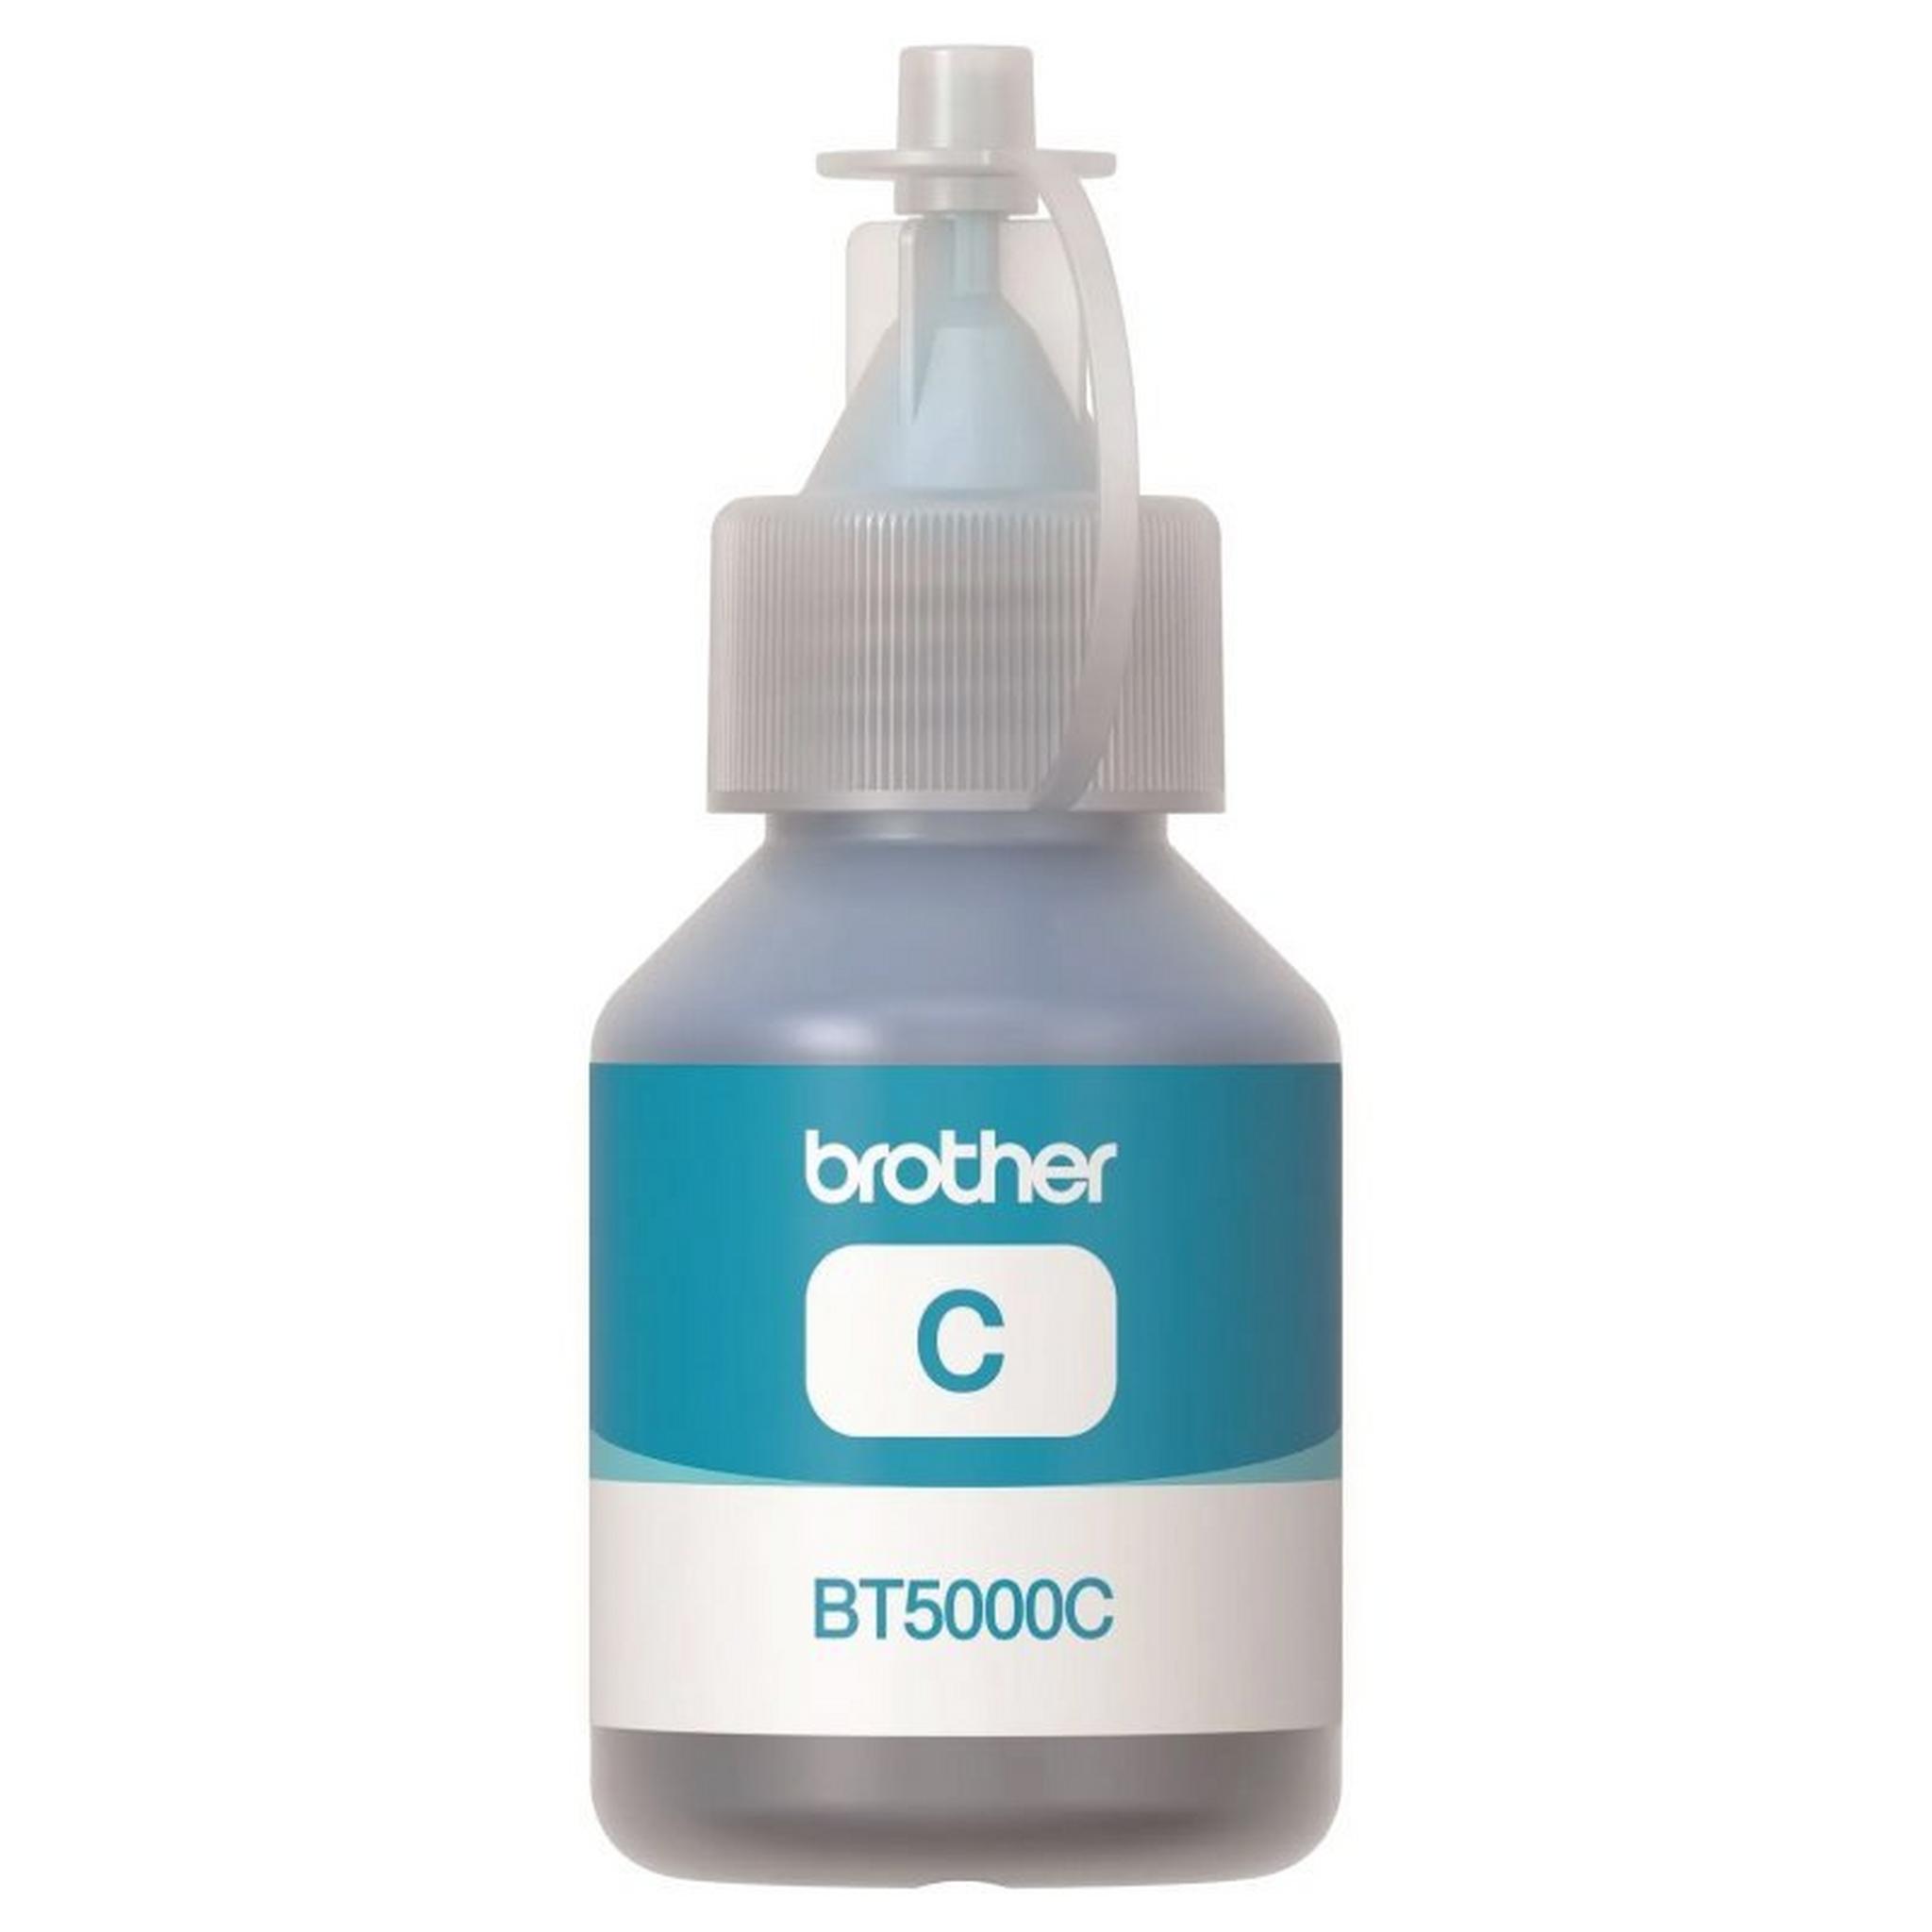 BROTHER Ink BT5000C for Inkjet Printing 5000 Page Yield - Cyan (Single Colour Pack)